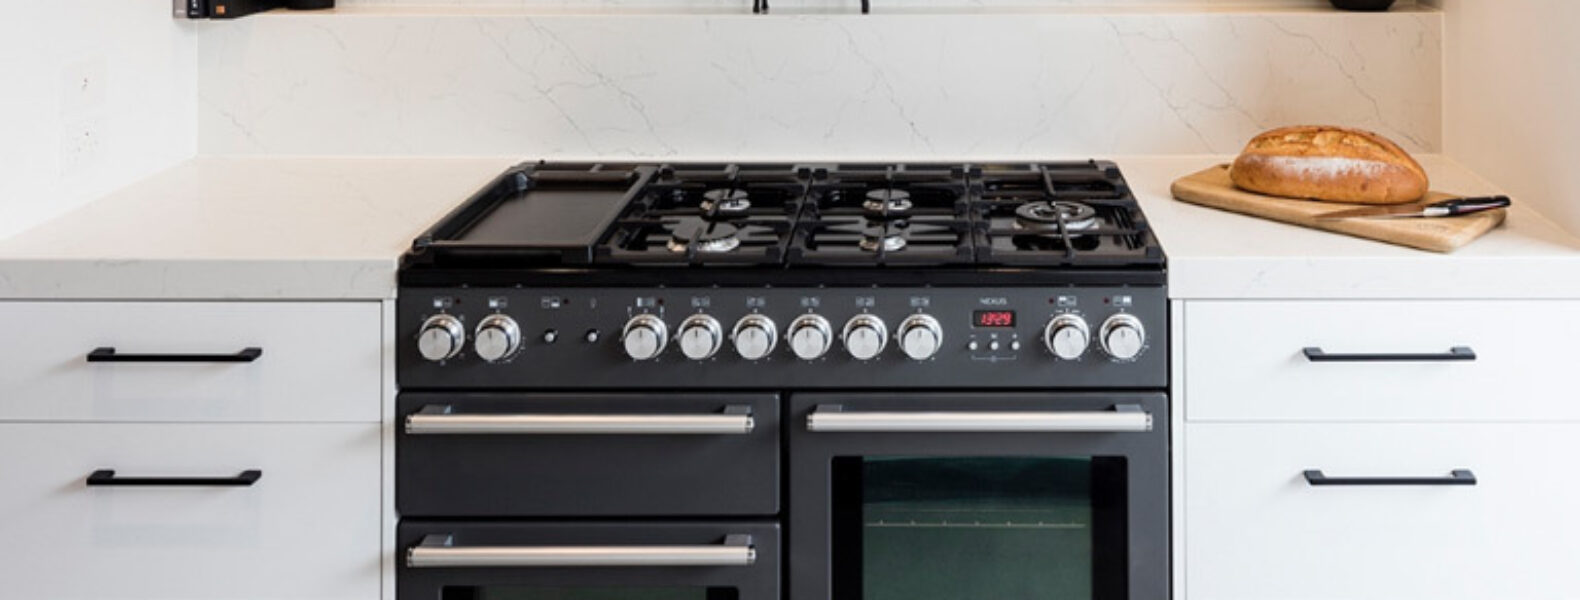 Falcon induction cookers in Australia